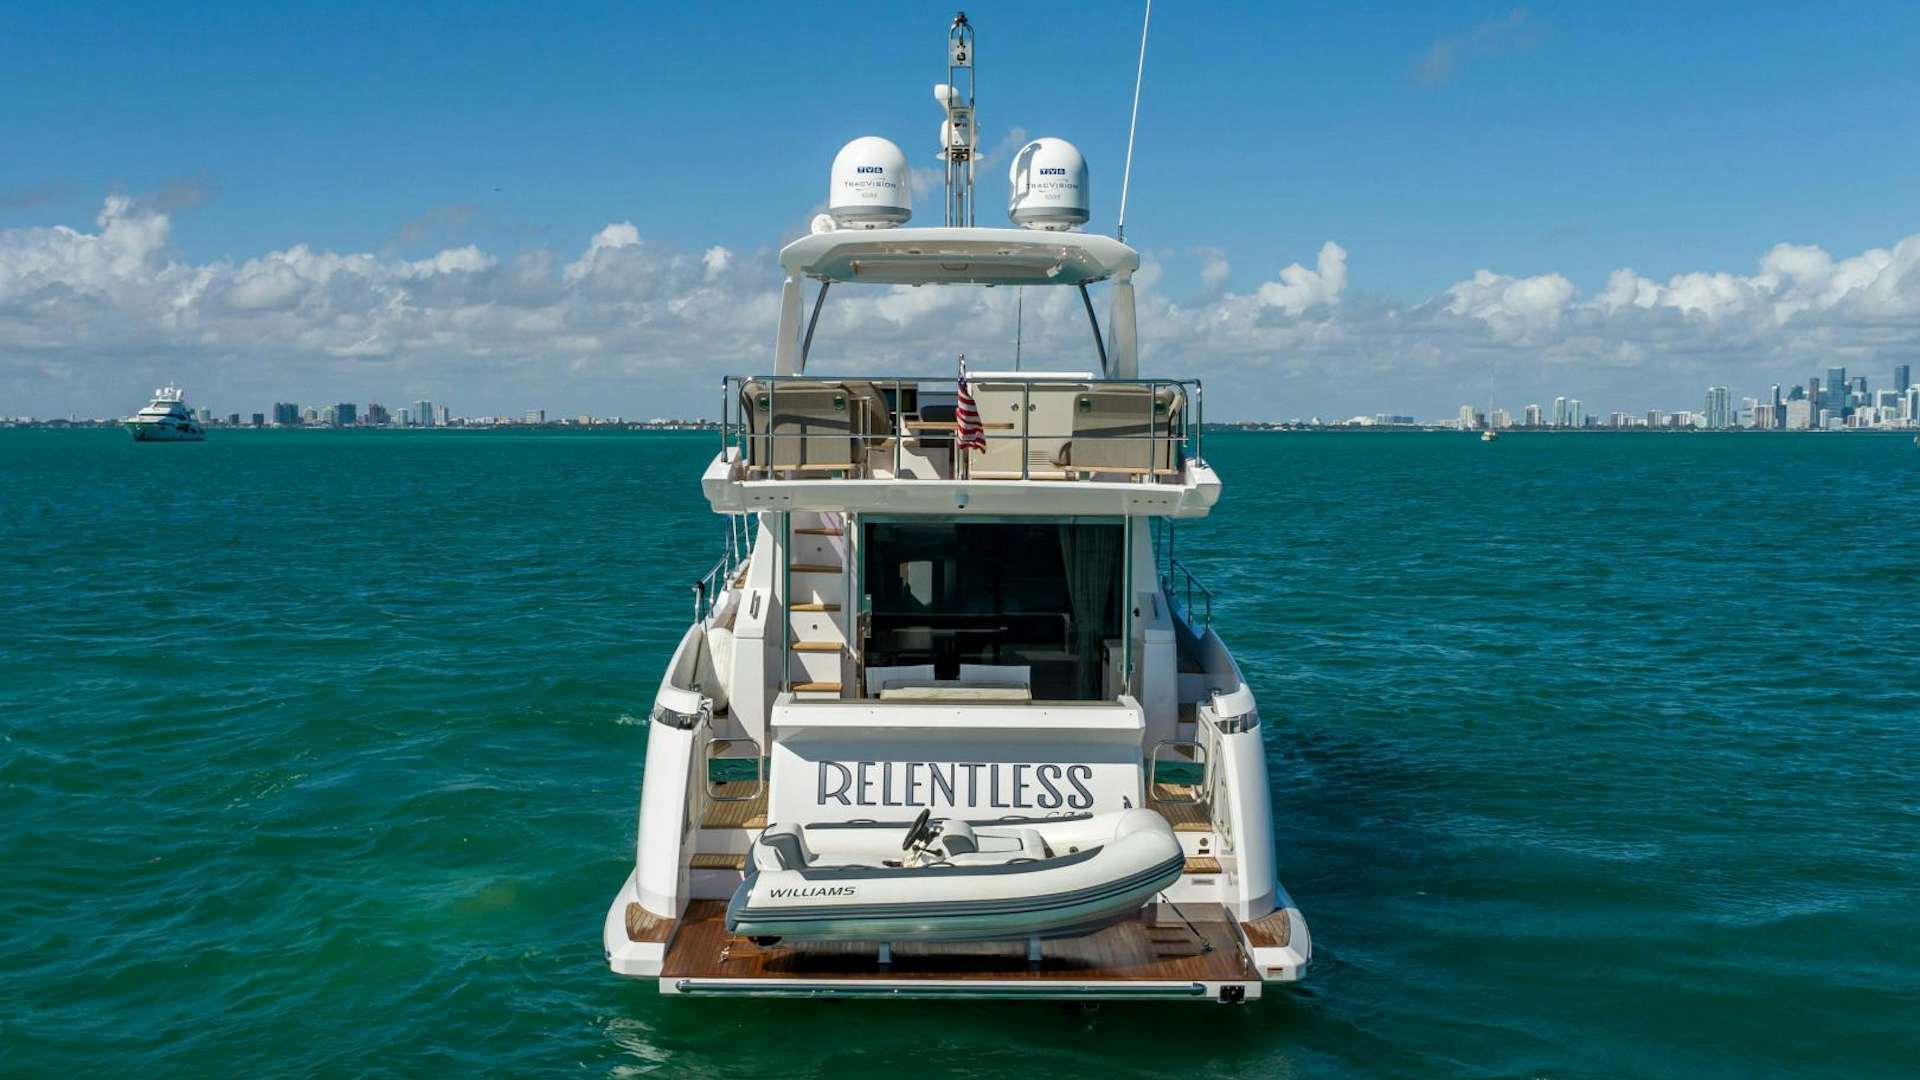 Relentless
Yacht for Sale